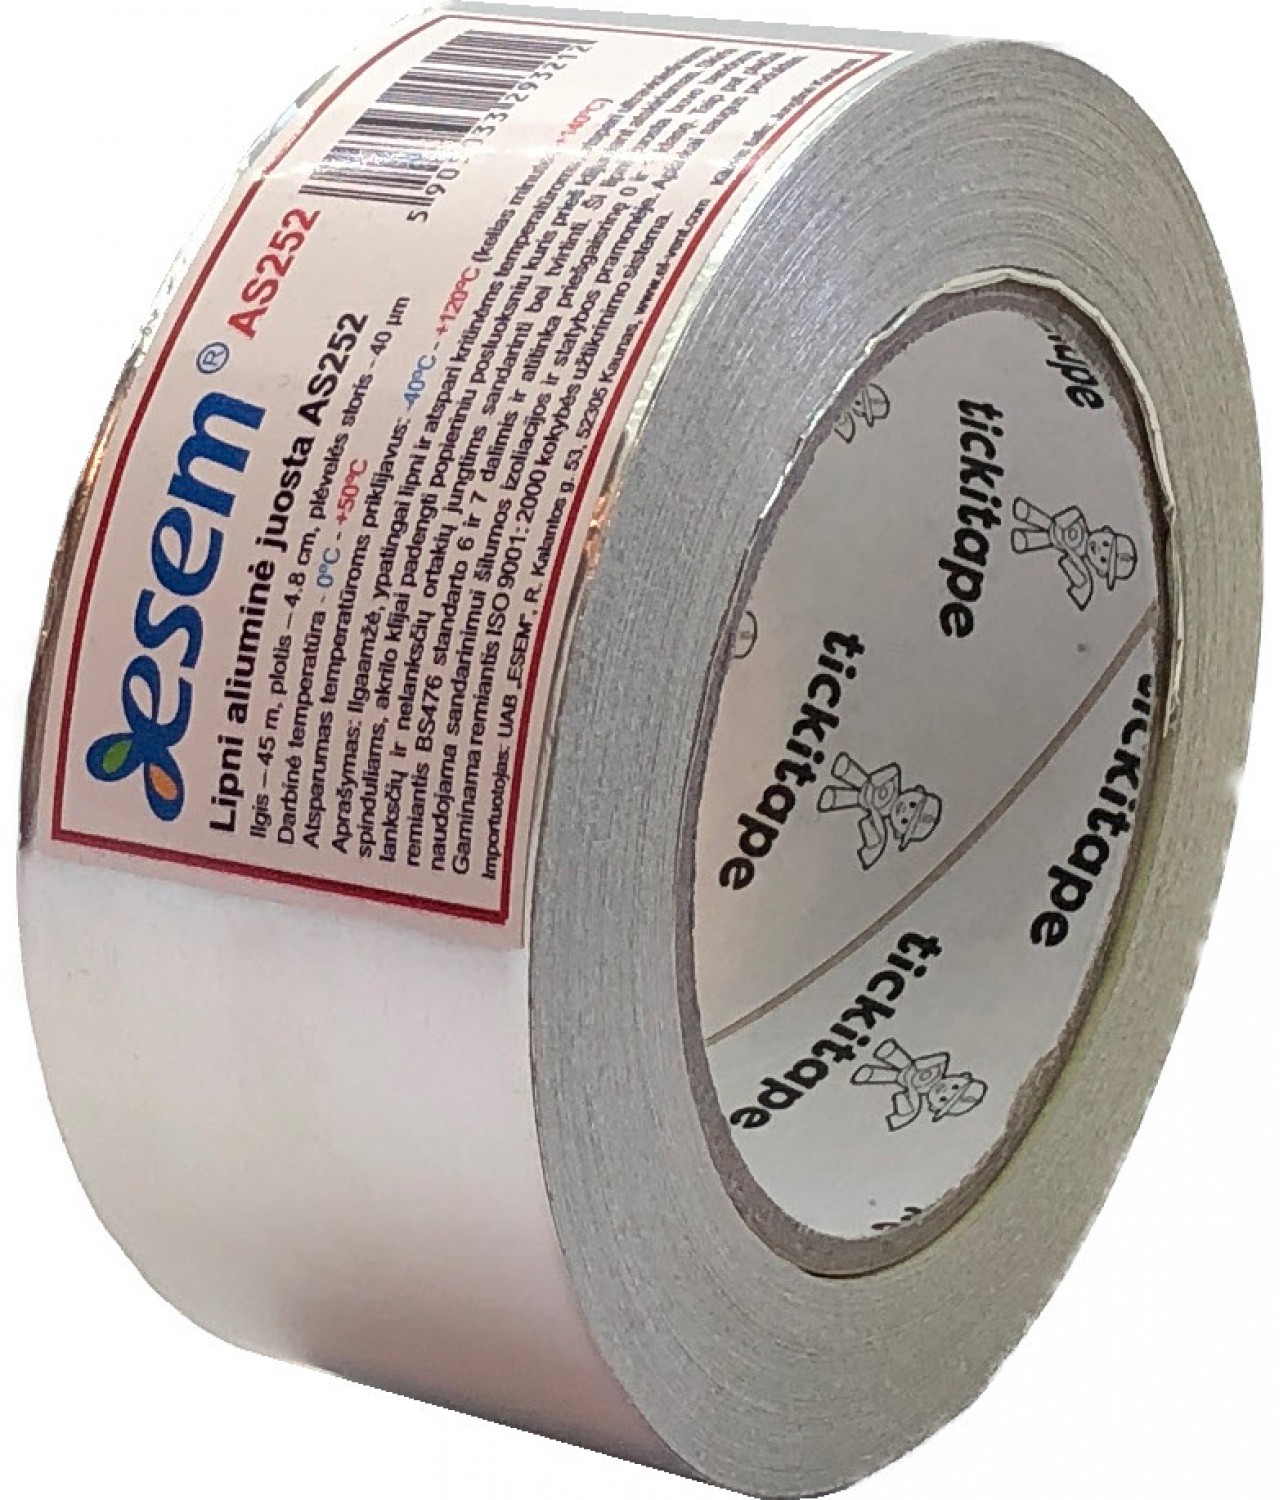 Adhesive aluminum foil tape for ducts AS291, 4.8 cm x 45 m, -40 - +120 °C